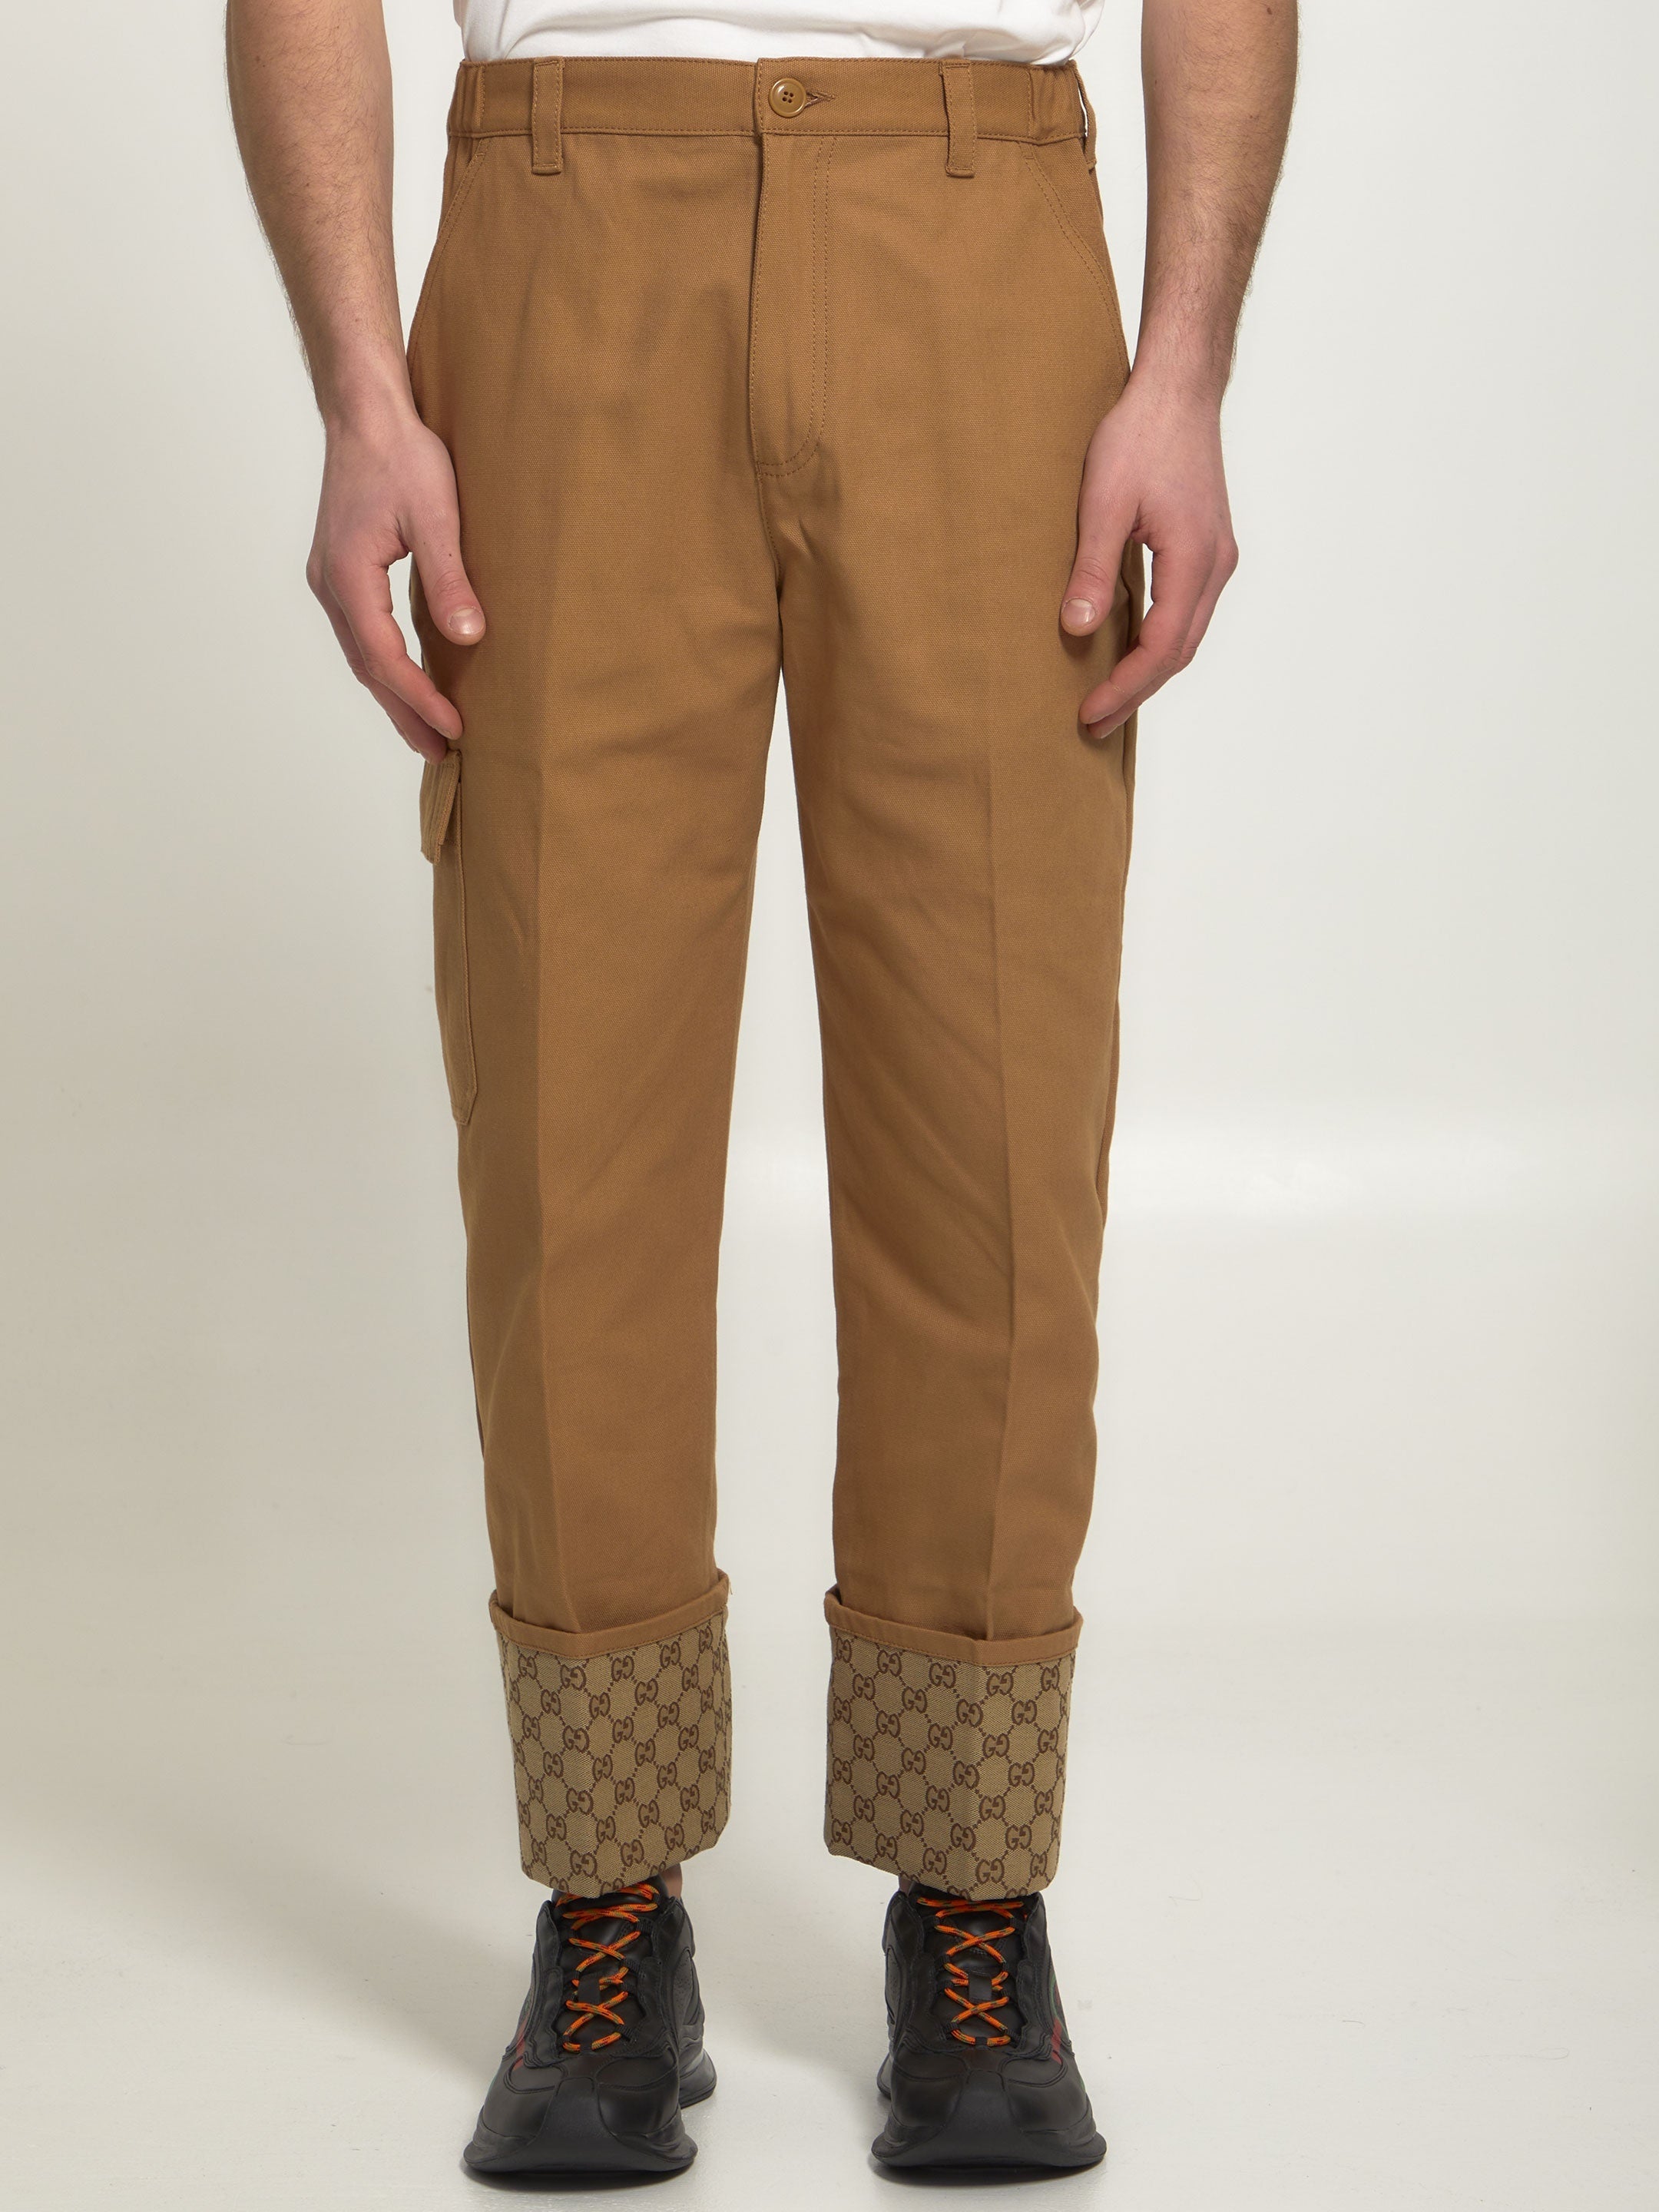 GUCCI-OUTLET-SALE-Beige-trousers-with-GG-cuff-Hosen-46-BEIGE-ARCHIVE-COLLECTION.jpg